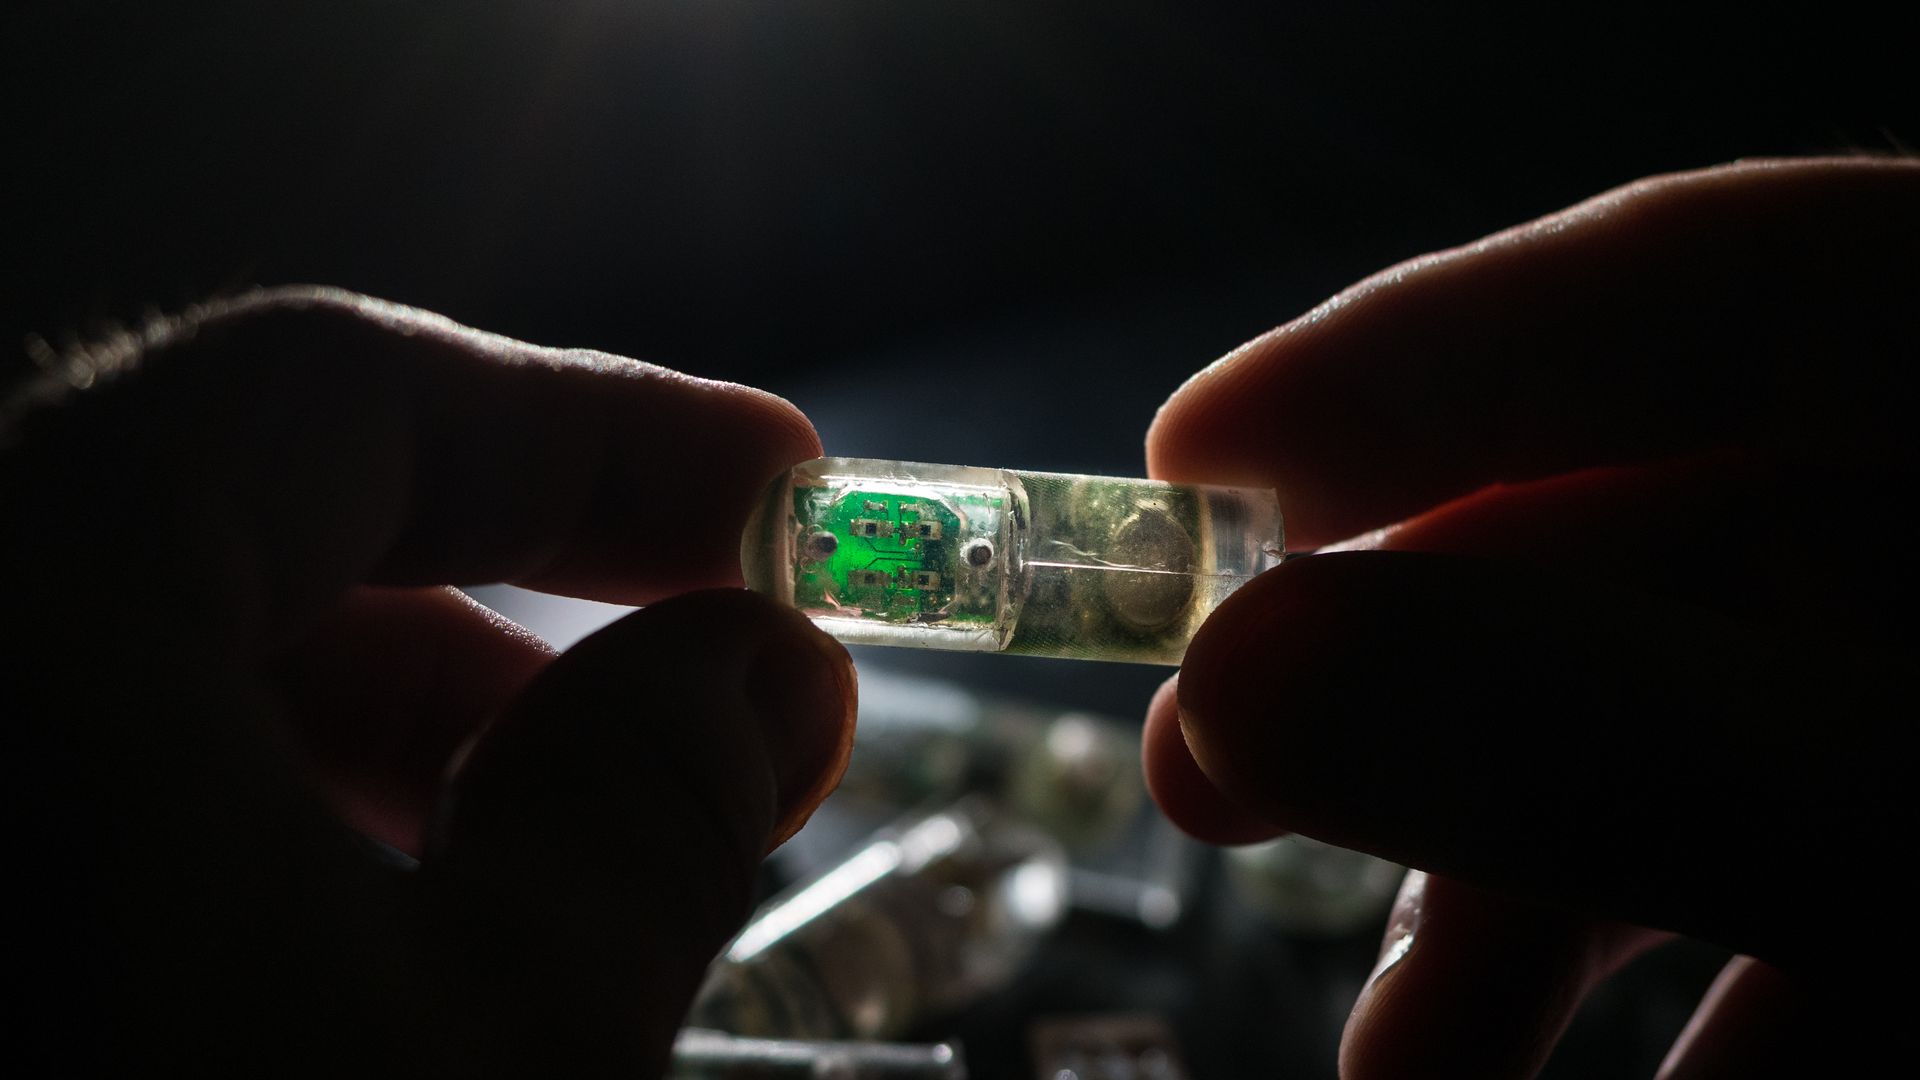 An ingestible sensor developed at MIT, which can detect internal bleeding in the stomach.